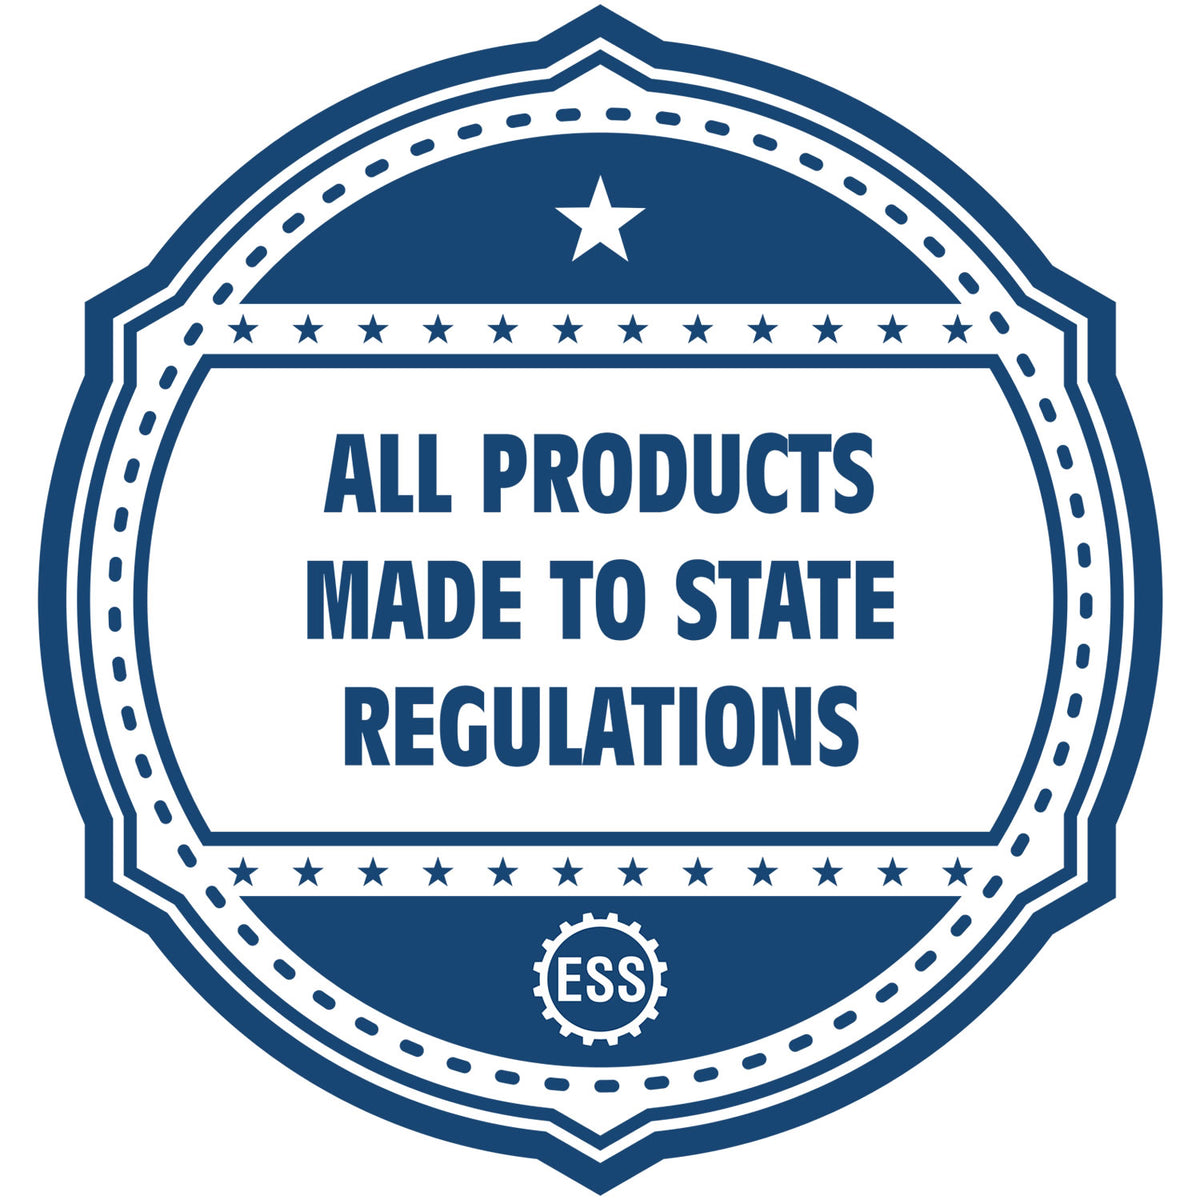 An icon or badge element for the Self-Inking Rectangular Idaho Notary Stamp showing that this product is made in compliance with state regulations.